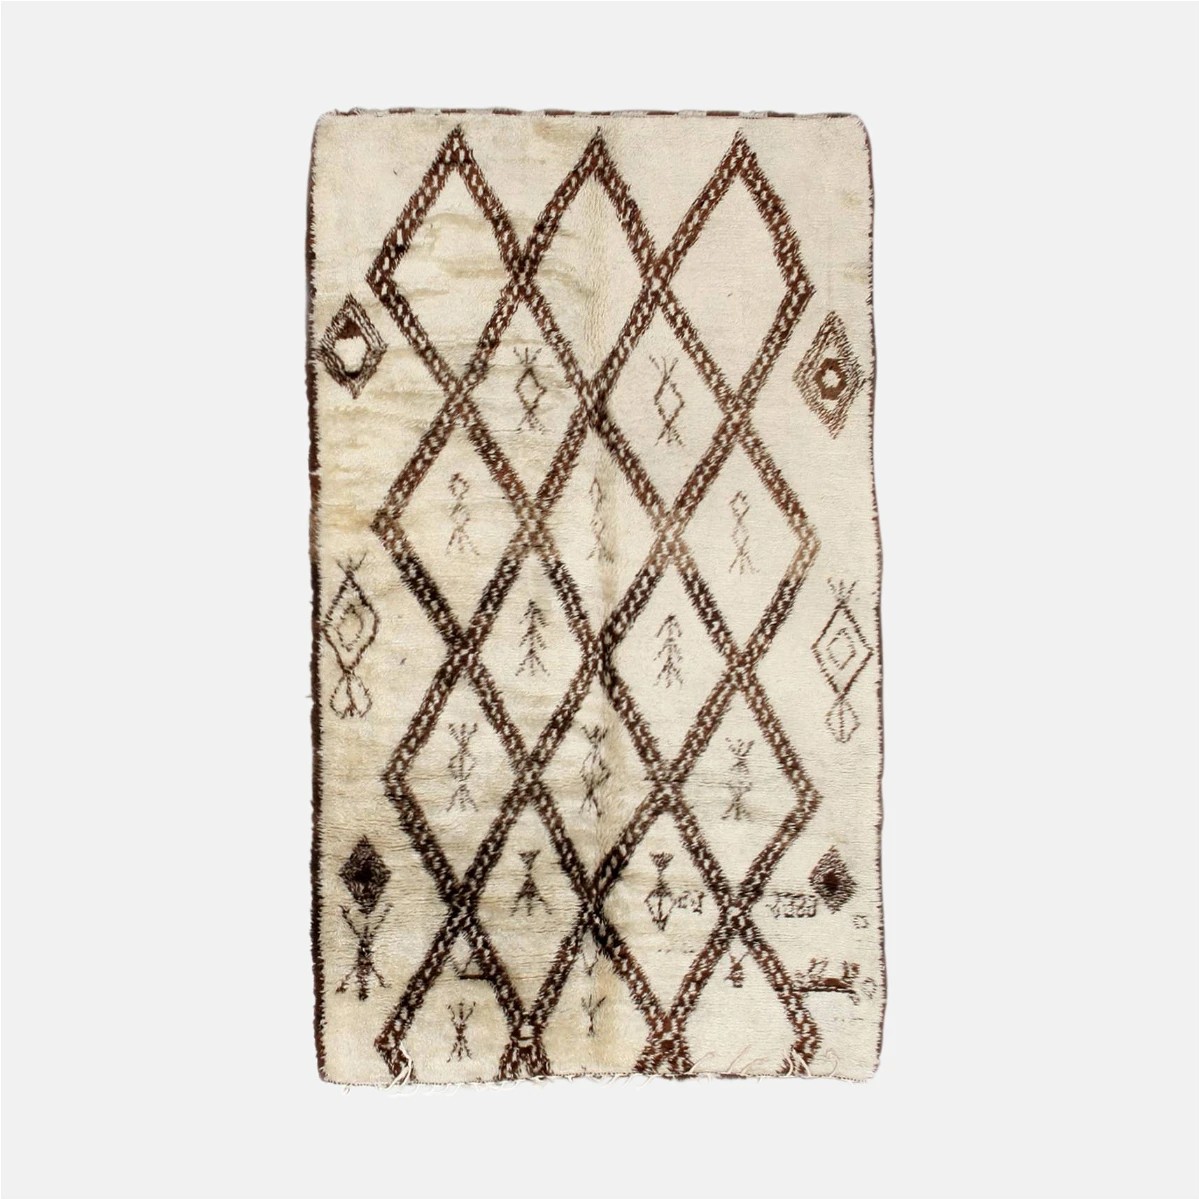 The image of an Moroccan Geometric Rug product